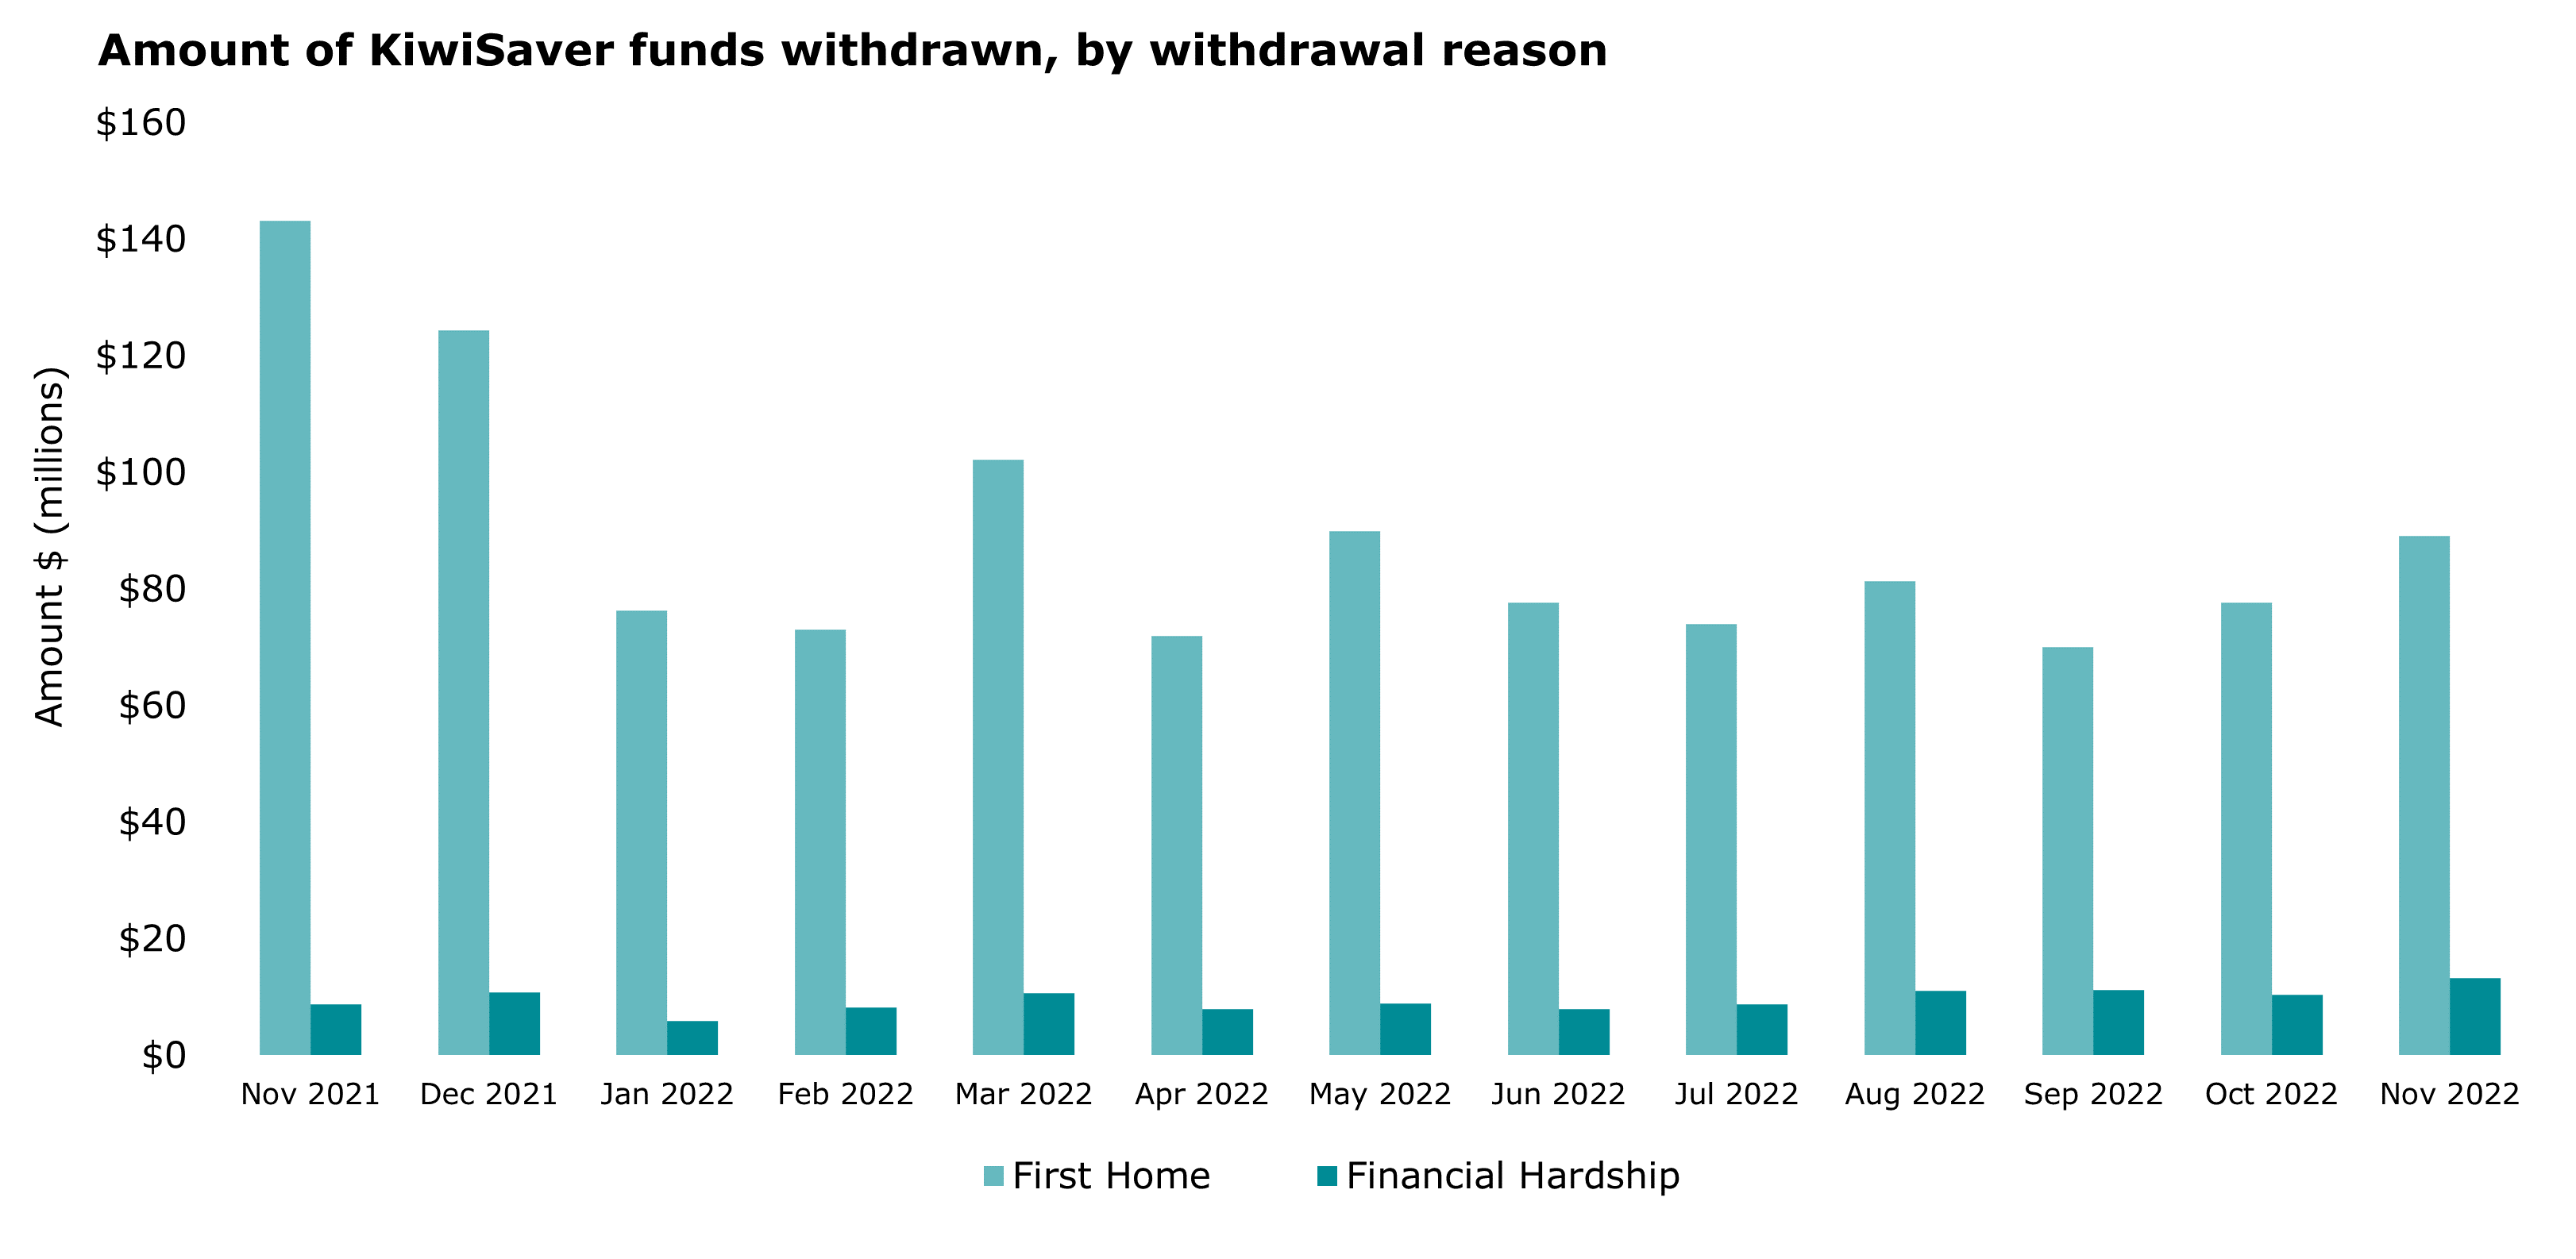 KiwiSaver monthly withdrawals by amount from November 2021 to November 2022